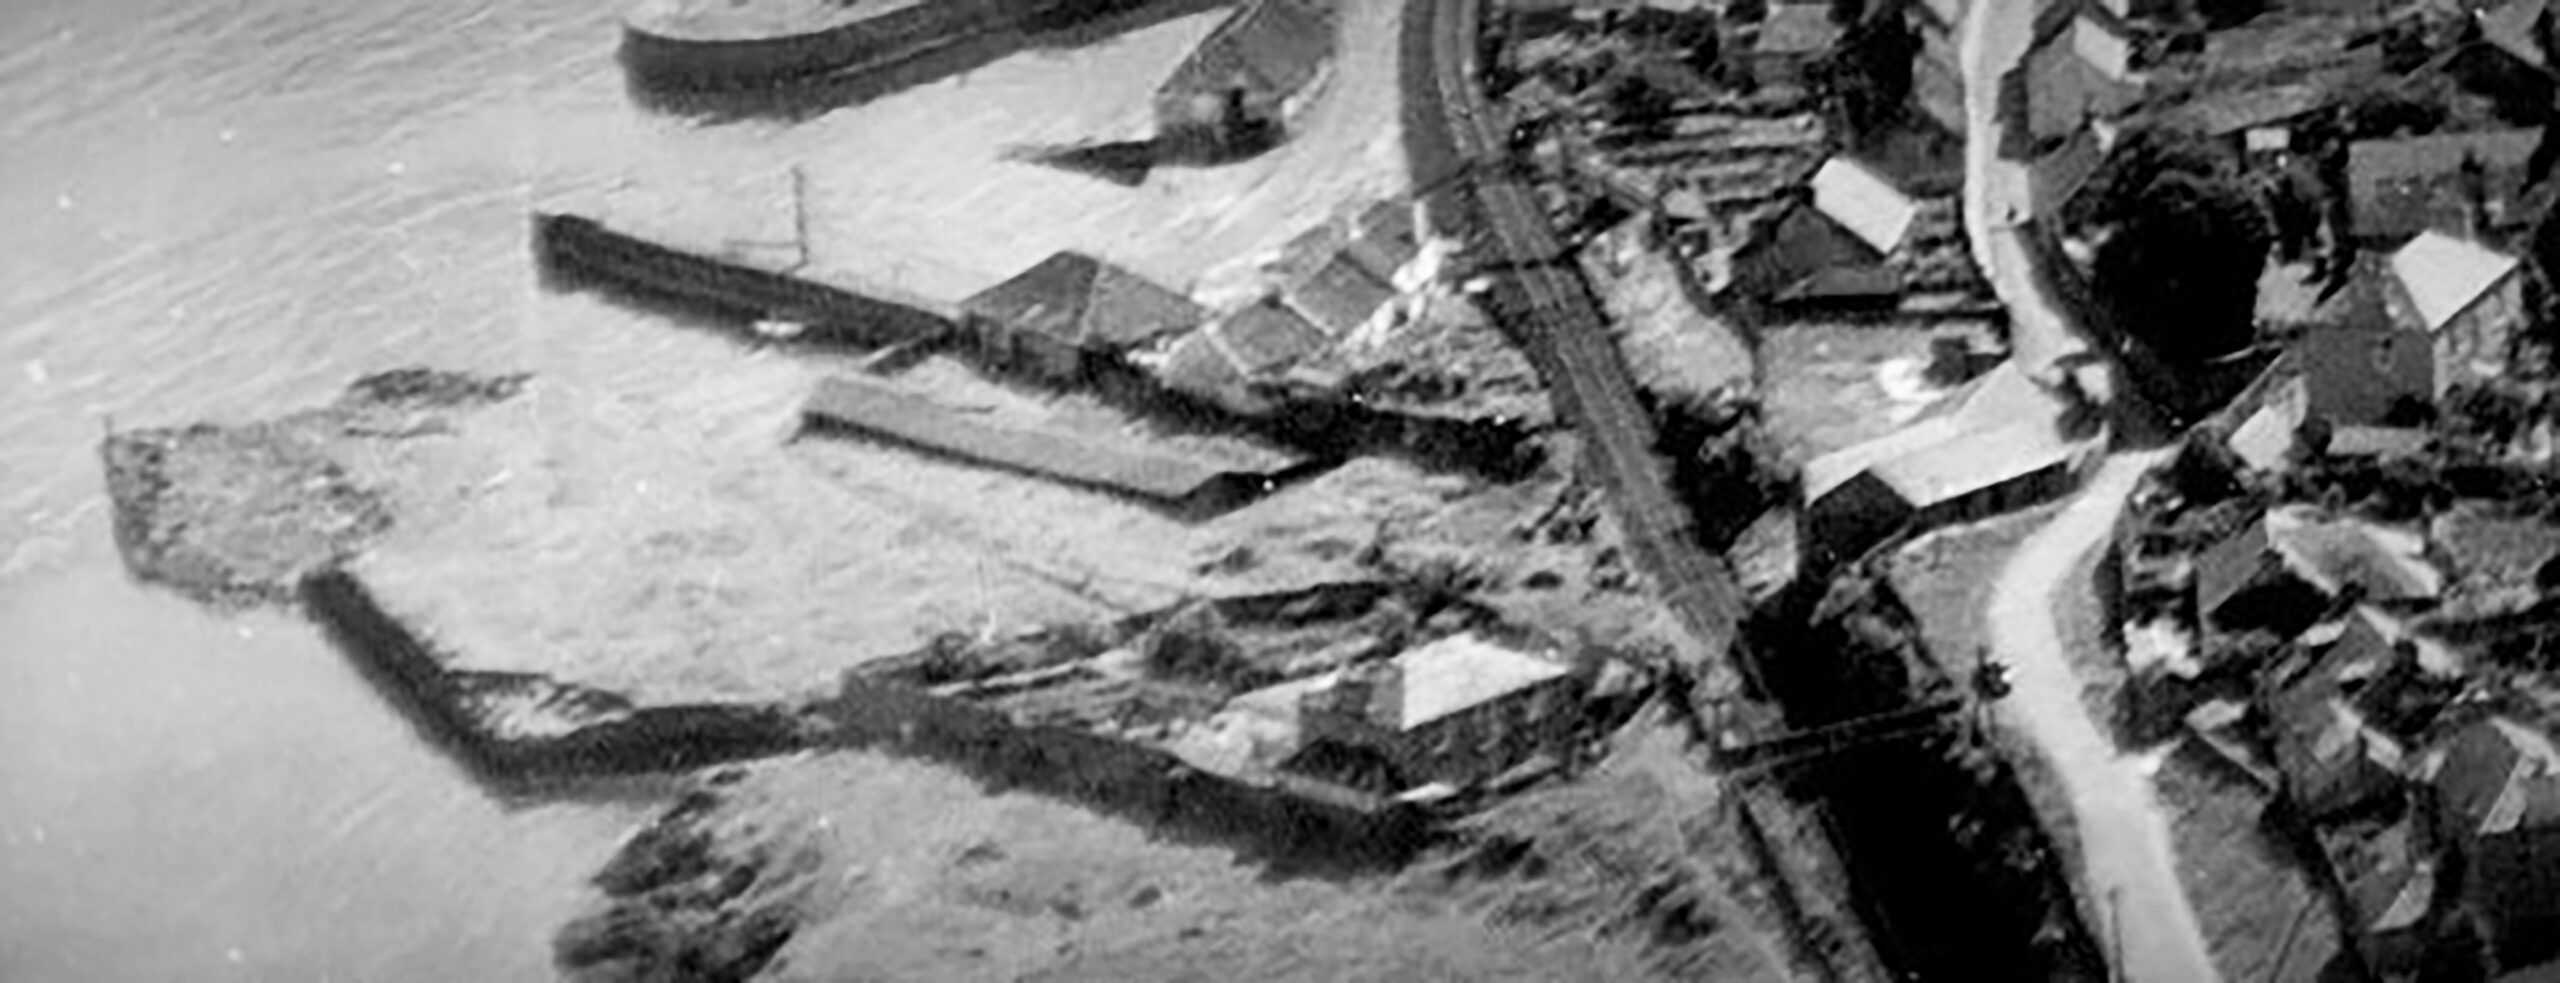 Tayport Heritage Trail - Board 4 - Lemonade Works from the air